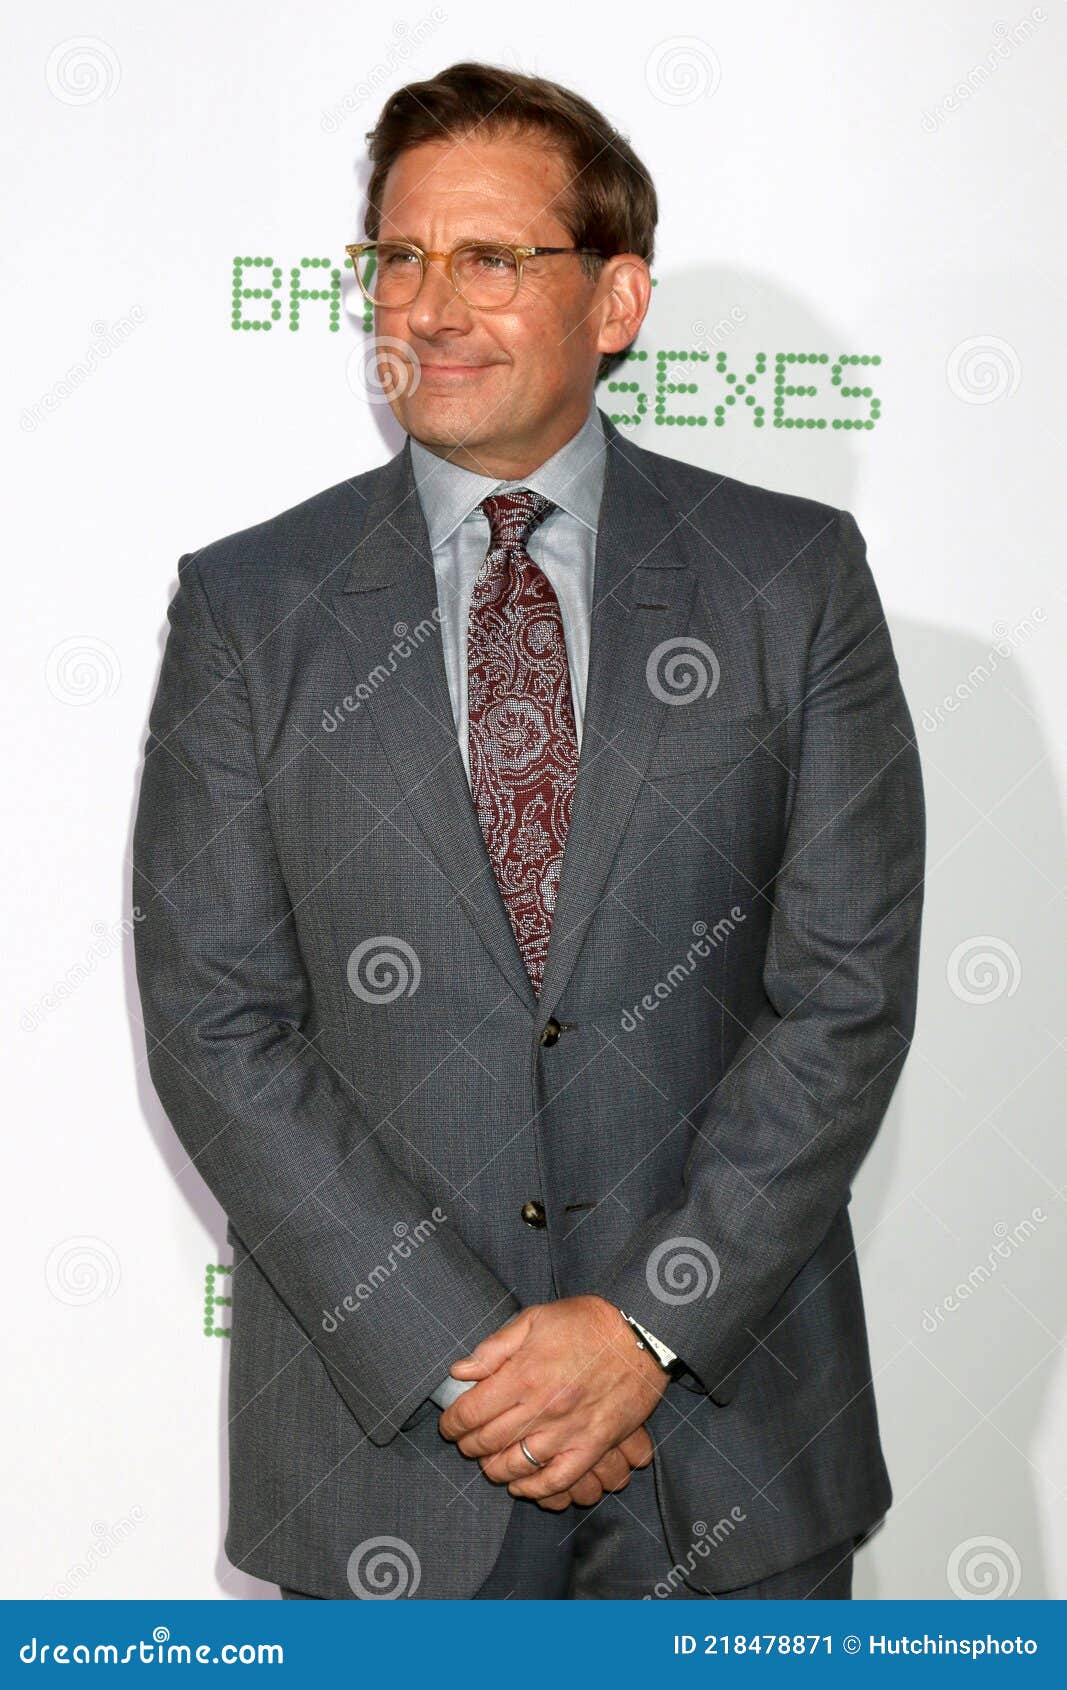 Photo: Steve Carell attends the Battle of the Sexes premiere in